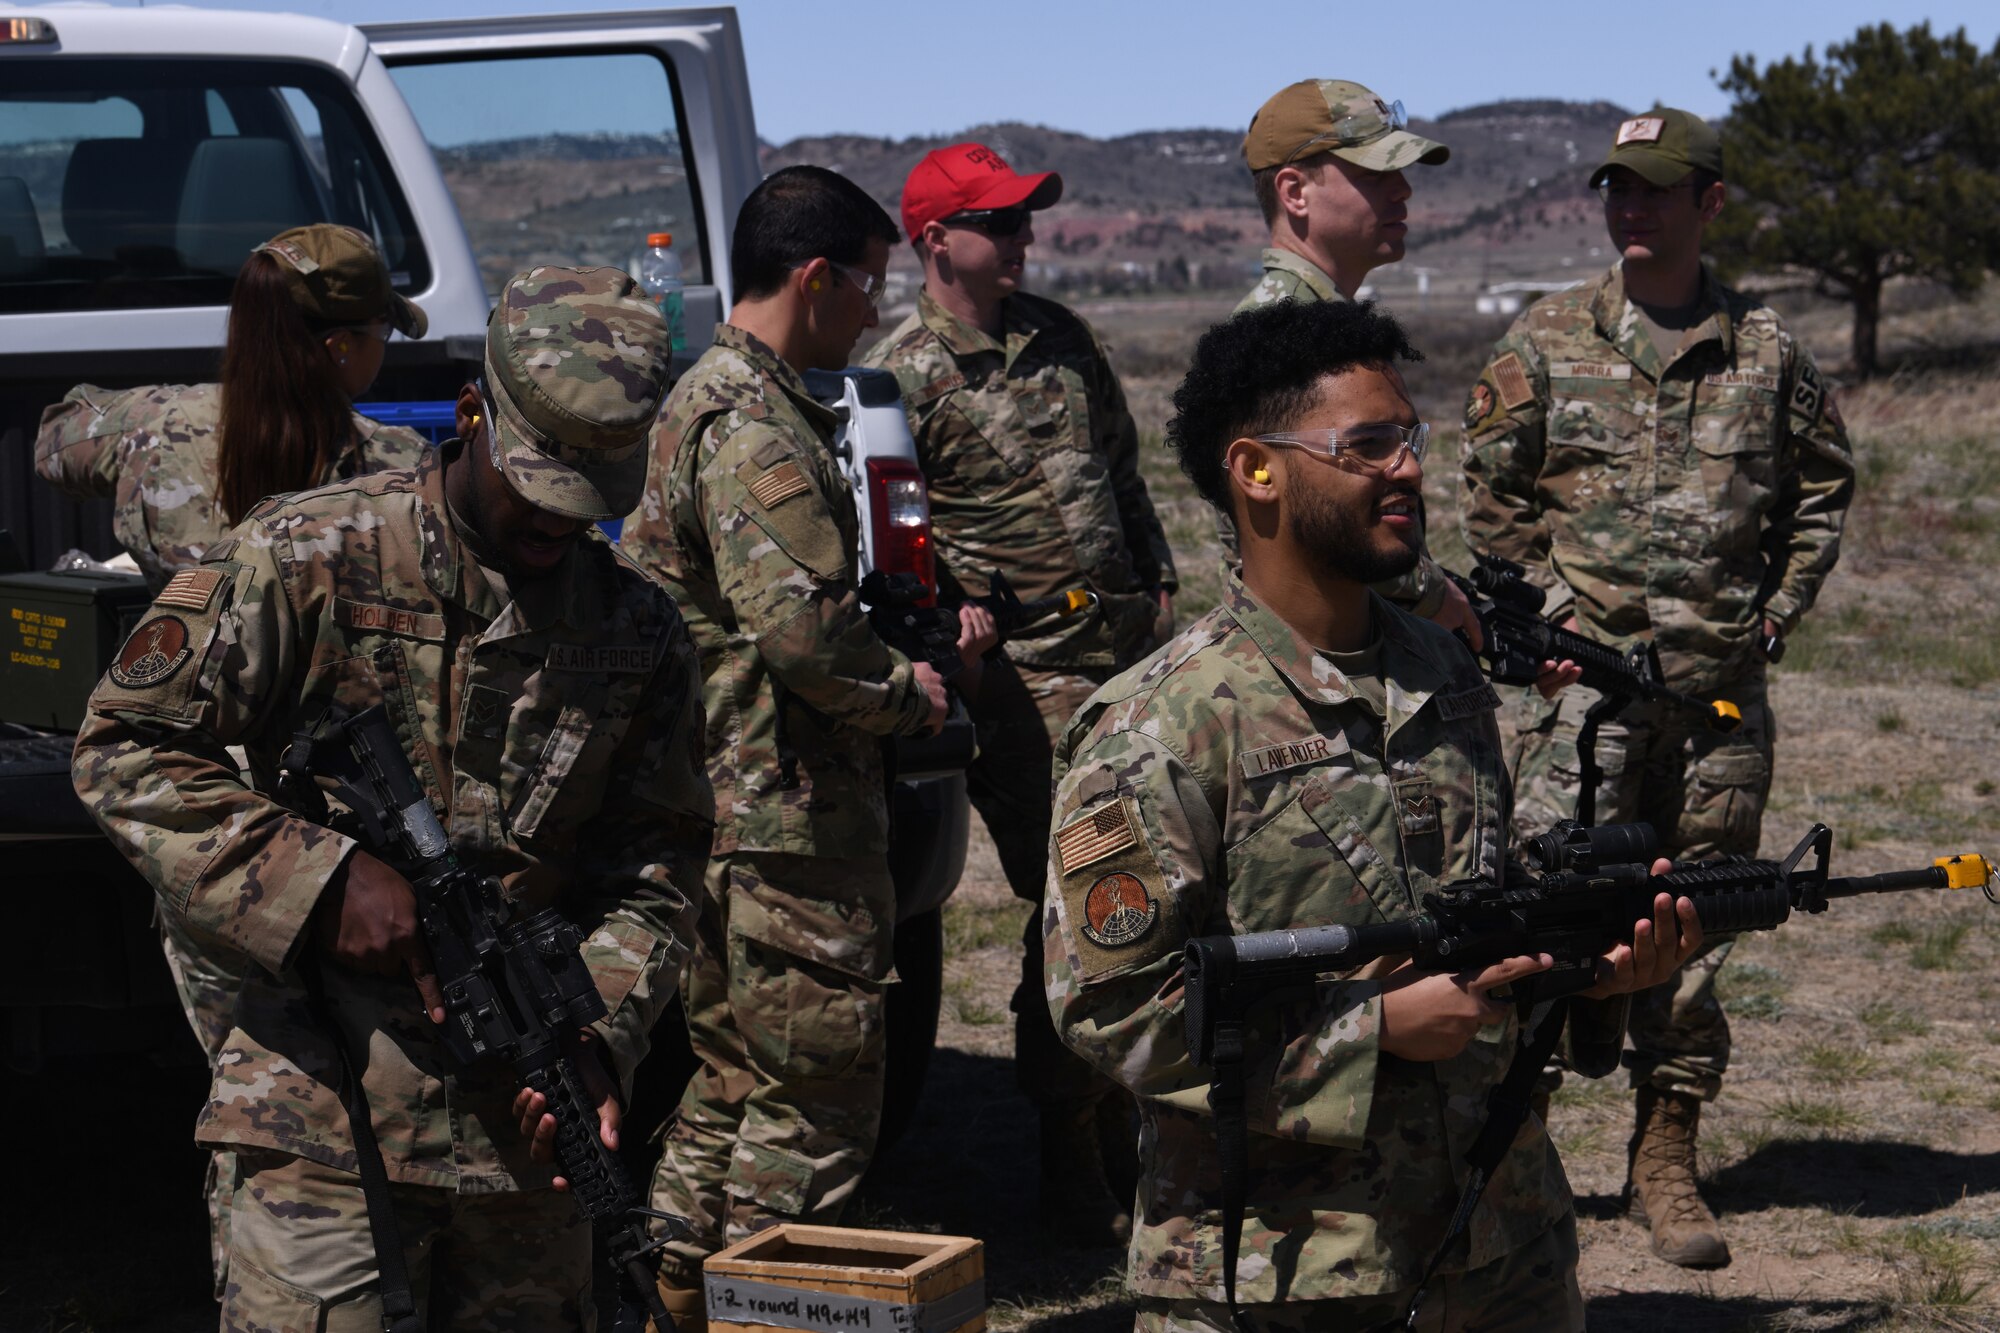 Members of the 90th Medical Group from F.E. Warren Air Force Base, Wyoming, prepare to participate in combat exercises at Camp Guernsey, Wyoming April 25, 2022. The 90 MDG visit gave both units an opportunity to improve readiness. The 90 GCTS integrated certain medical practices in their everyday operations while the 90 MDG was able to practice certain combat tactics taught by the 90 GCTS. (U.S. Air Force photo by Airman 1st Class Darius Frazier.)